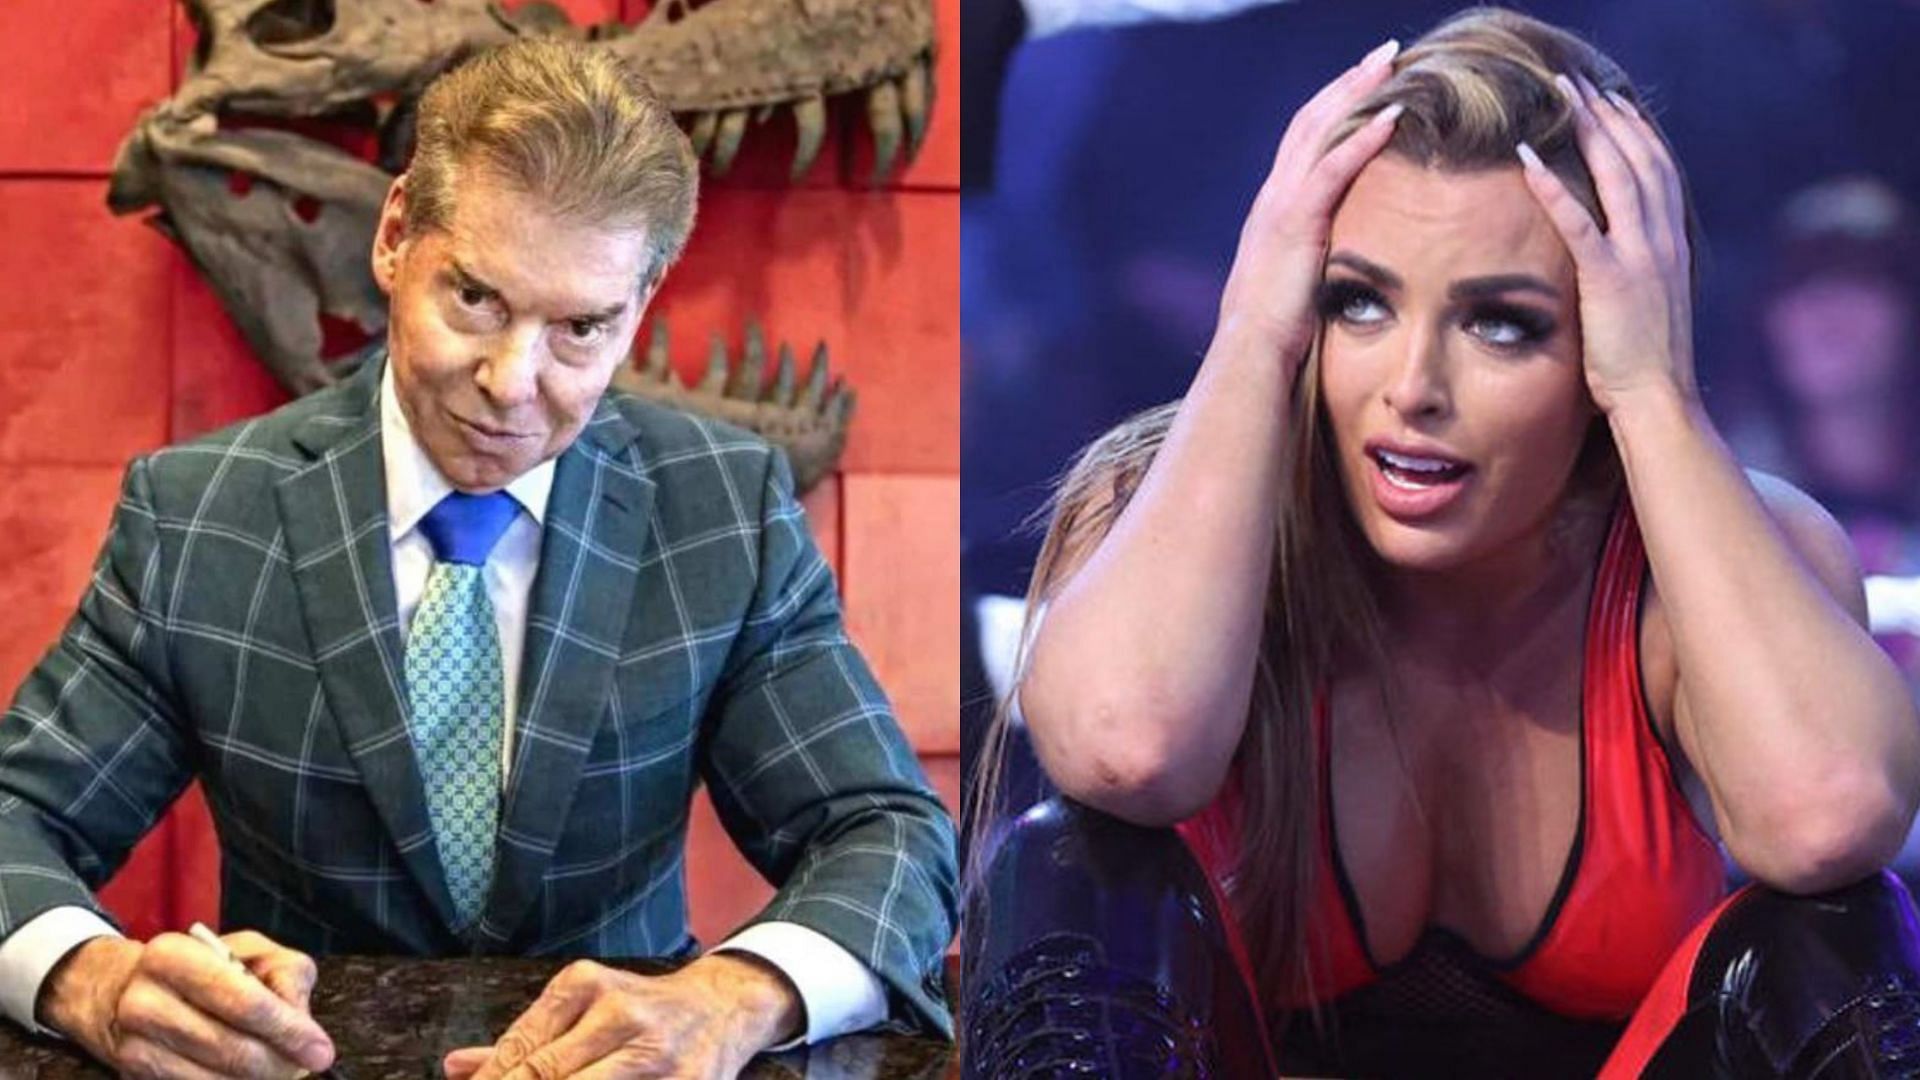 Vince McMahon (left) and Mandy Rose (right)